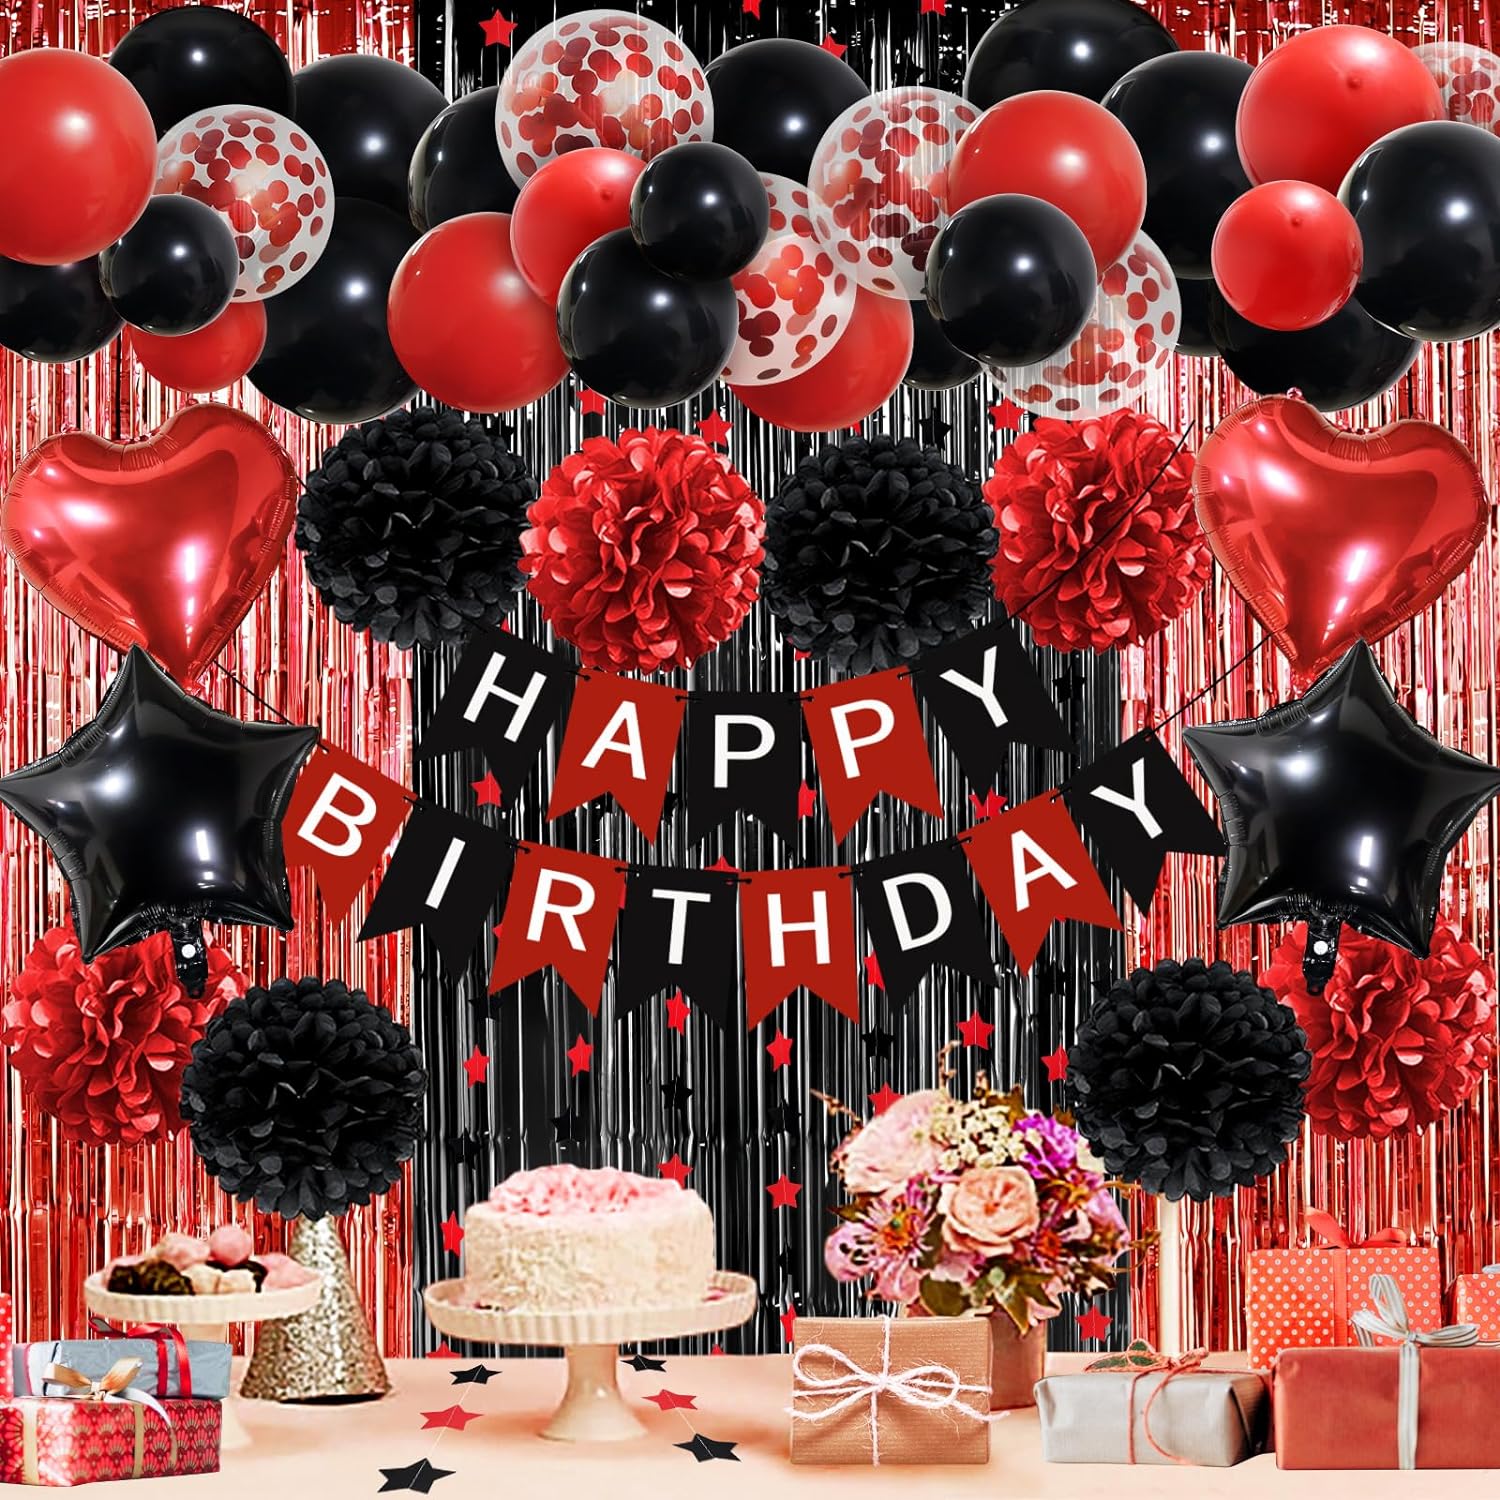 ZERODECO Red Black Birthday Party Decorations, Happy Birthday Banner Pompoms Red Black Balloon Arch Fringe Curtain Party Dcor for Baby Girls Women Black and Red Birthday Party